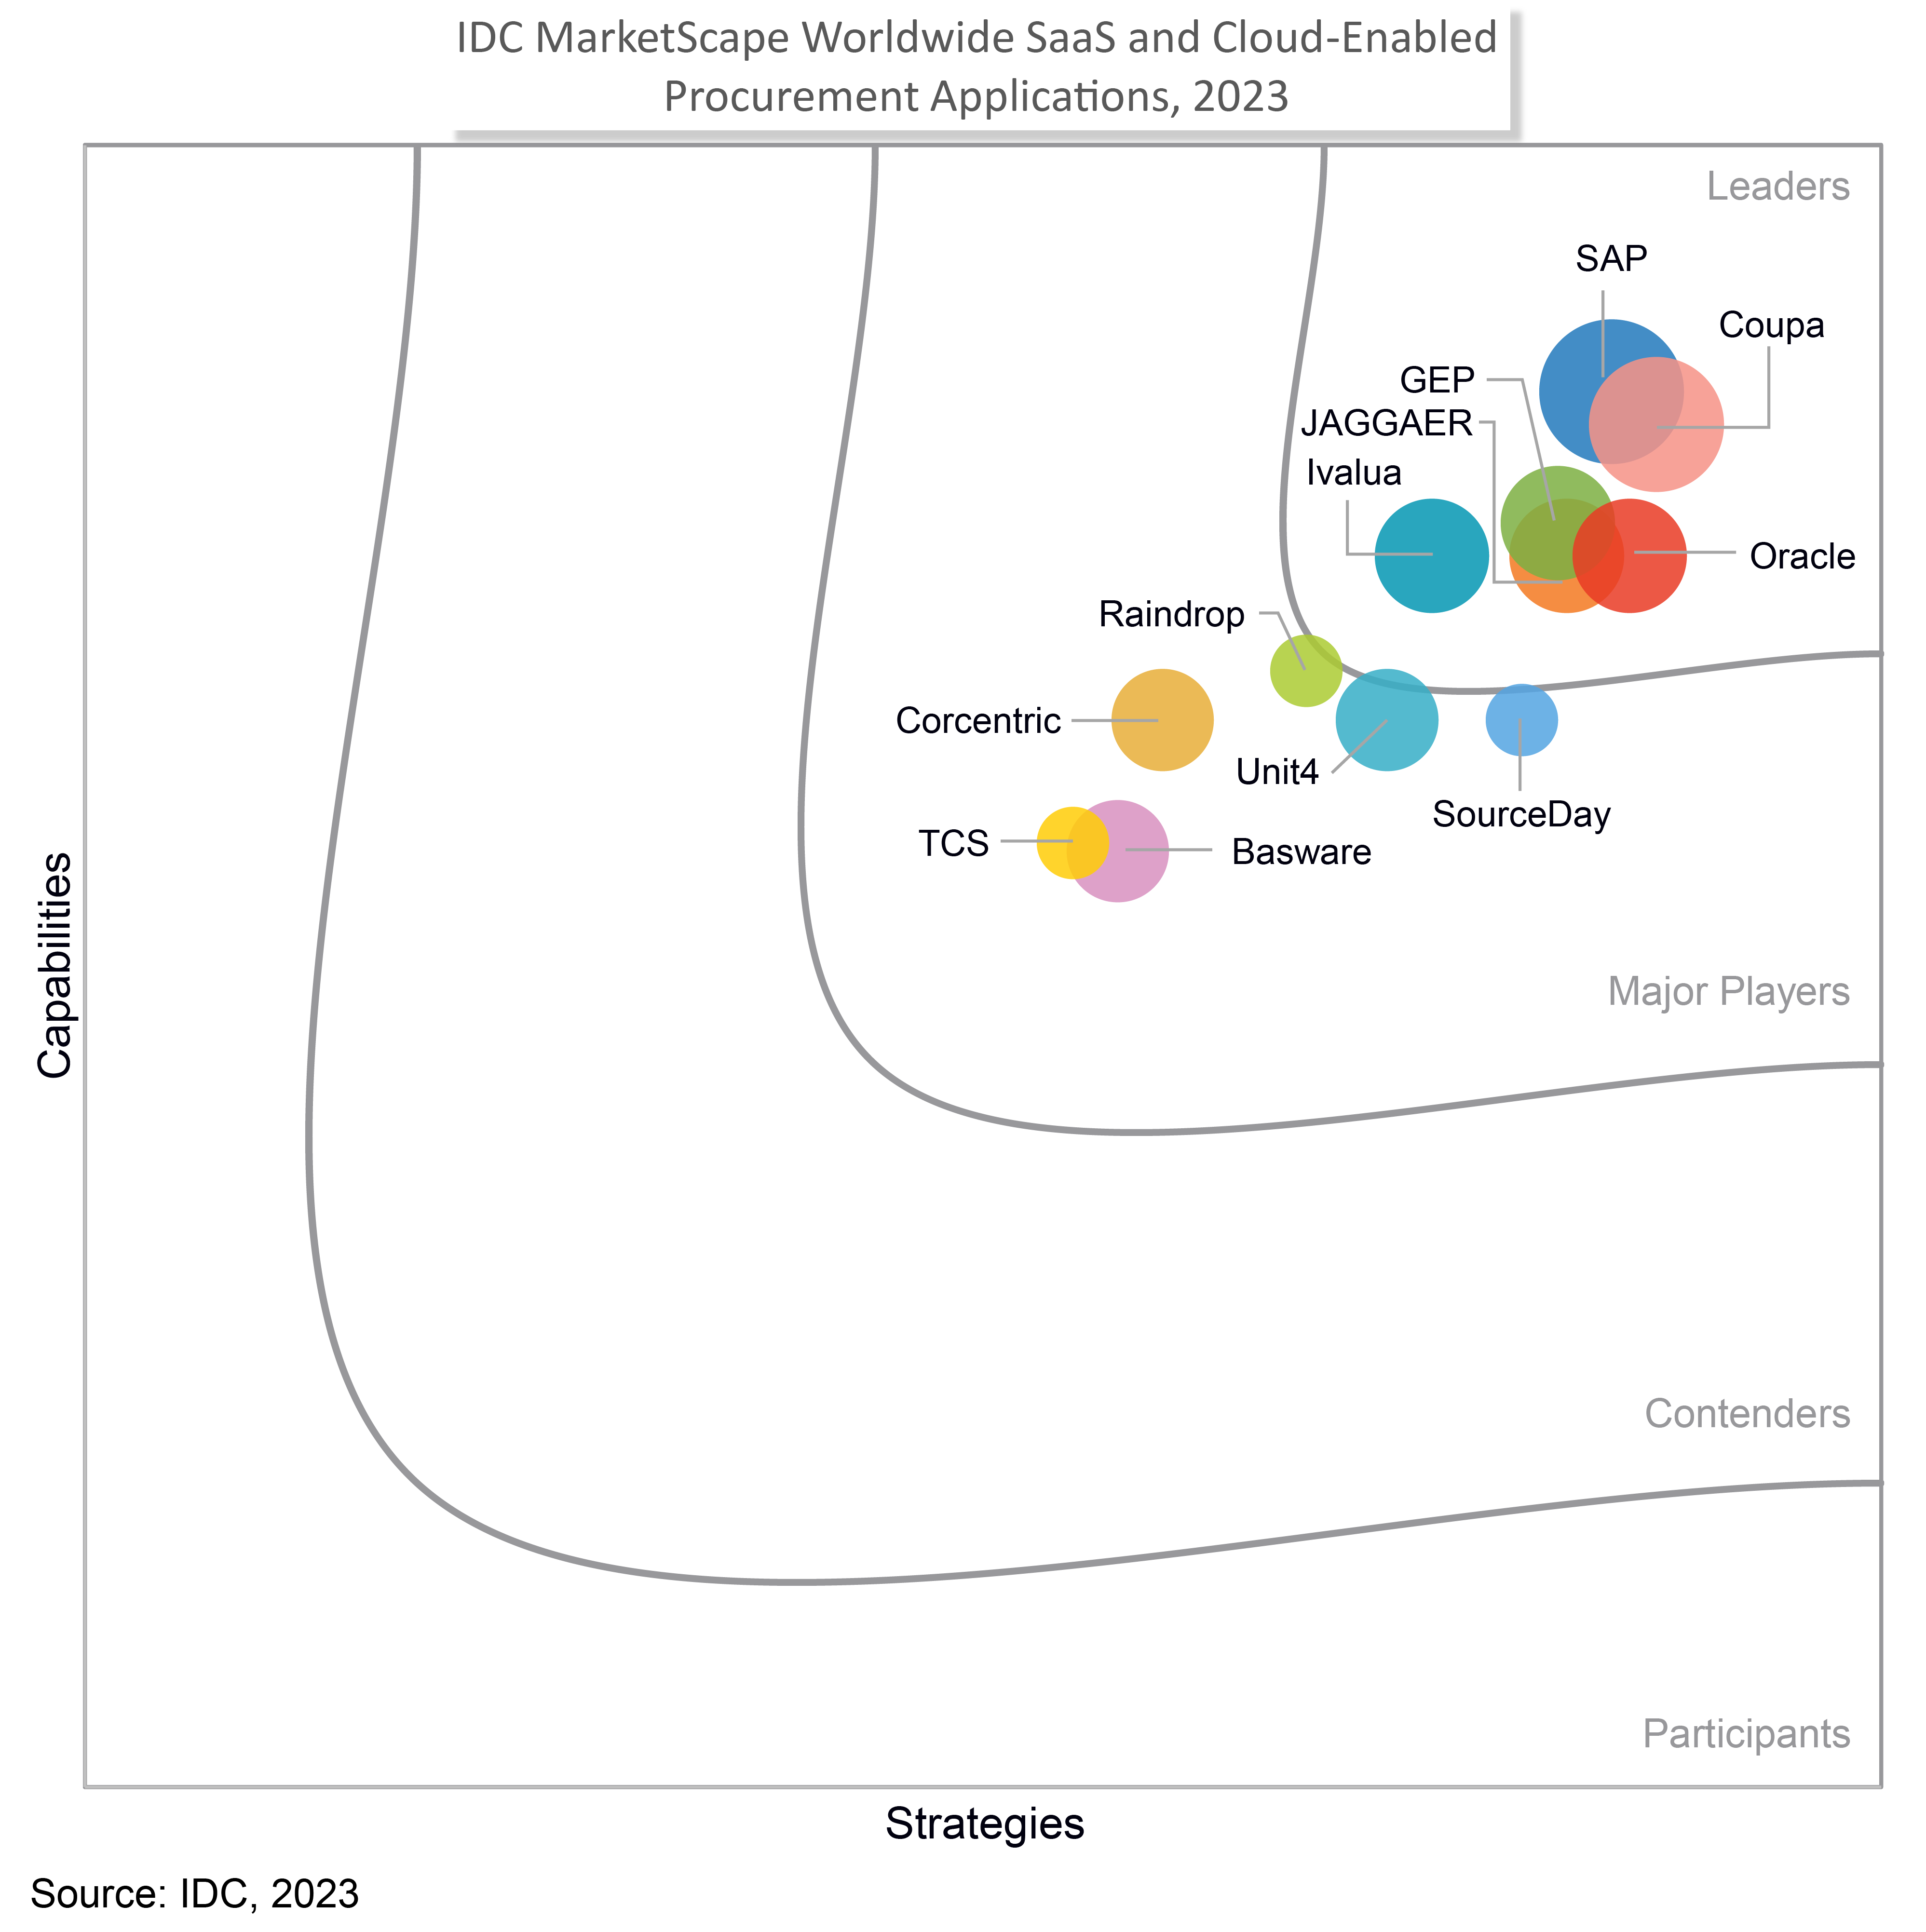 Coupaがリーダーに選出： IDC MarketScape Worldwide SaaS and Cloud-Enabled Procurement Applications 2023年ベンダーアセスメント　